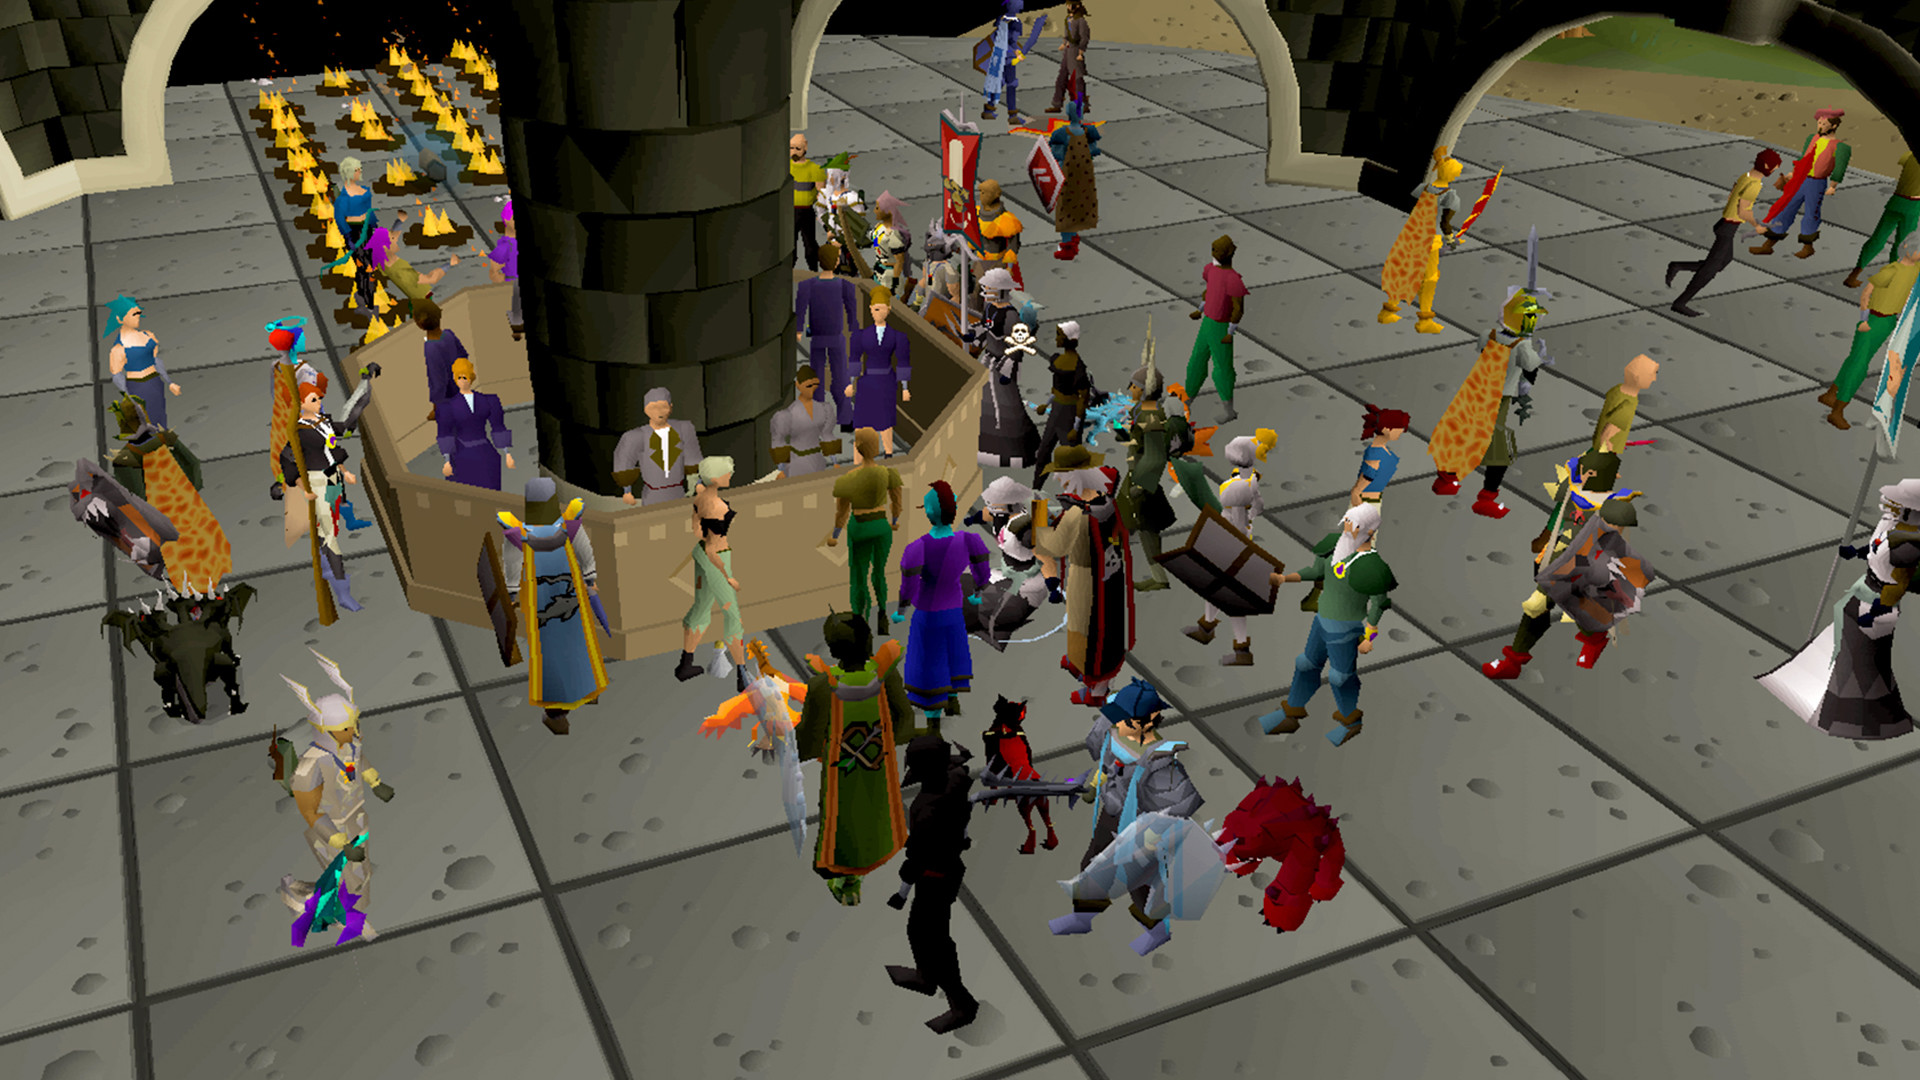 2023: OSRS HD Graphics, live only on the Steam Client! : r/2007scape